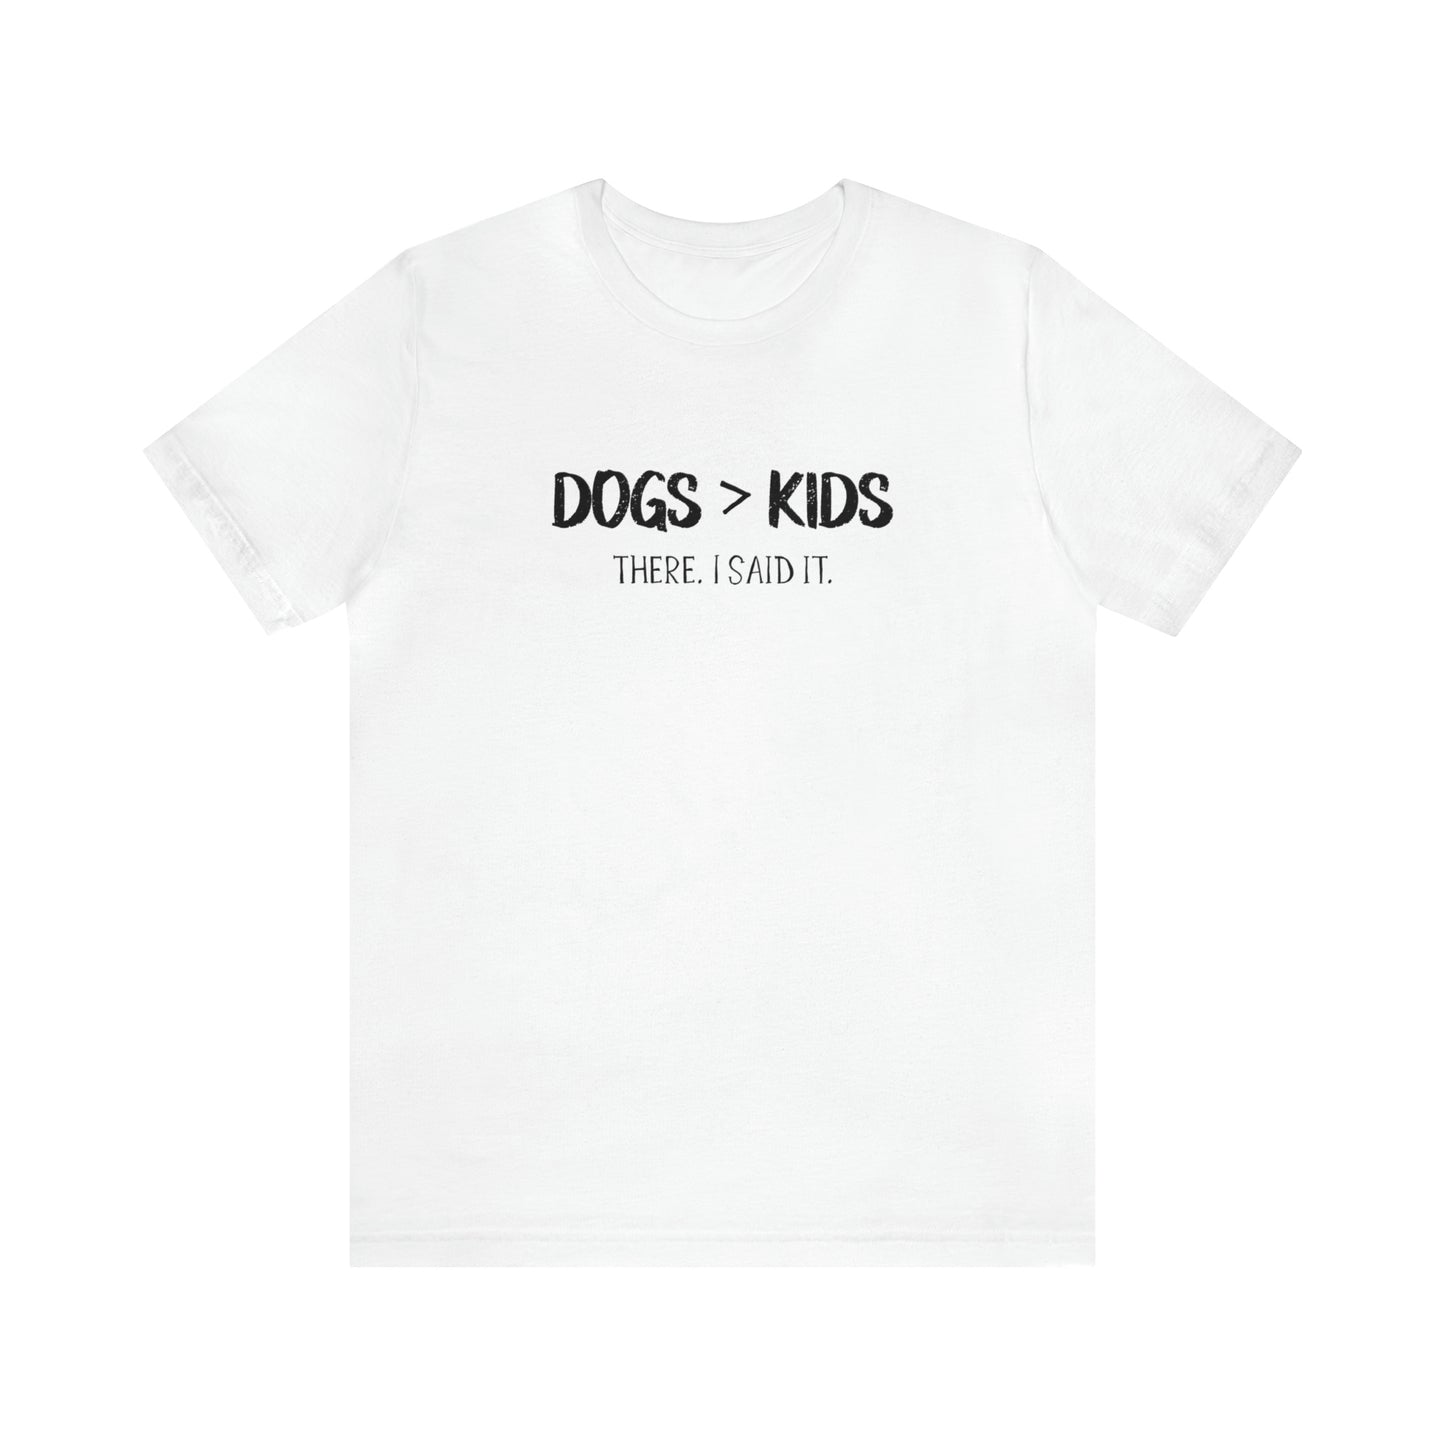 dogs are better than kids t shirt white